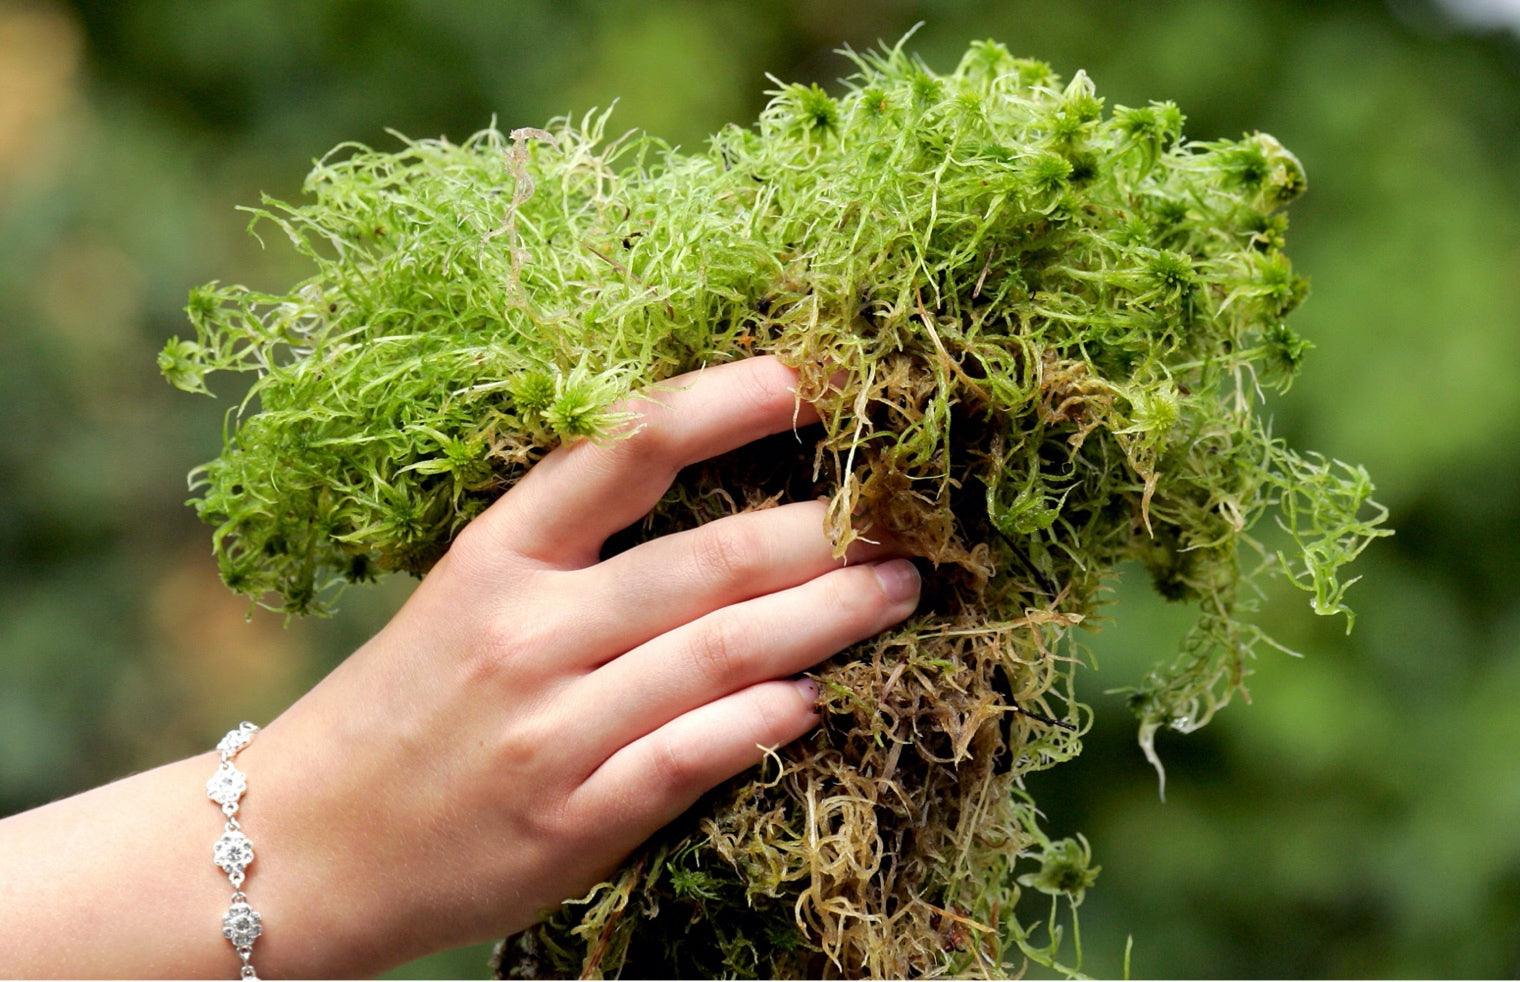 A hand holding a bundle of green herbs